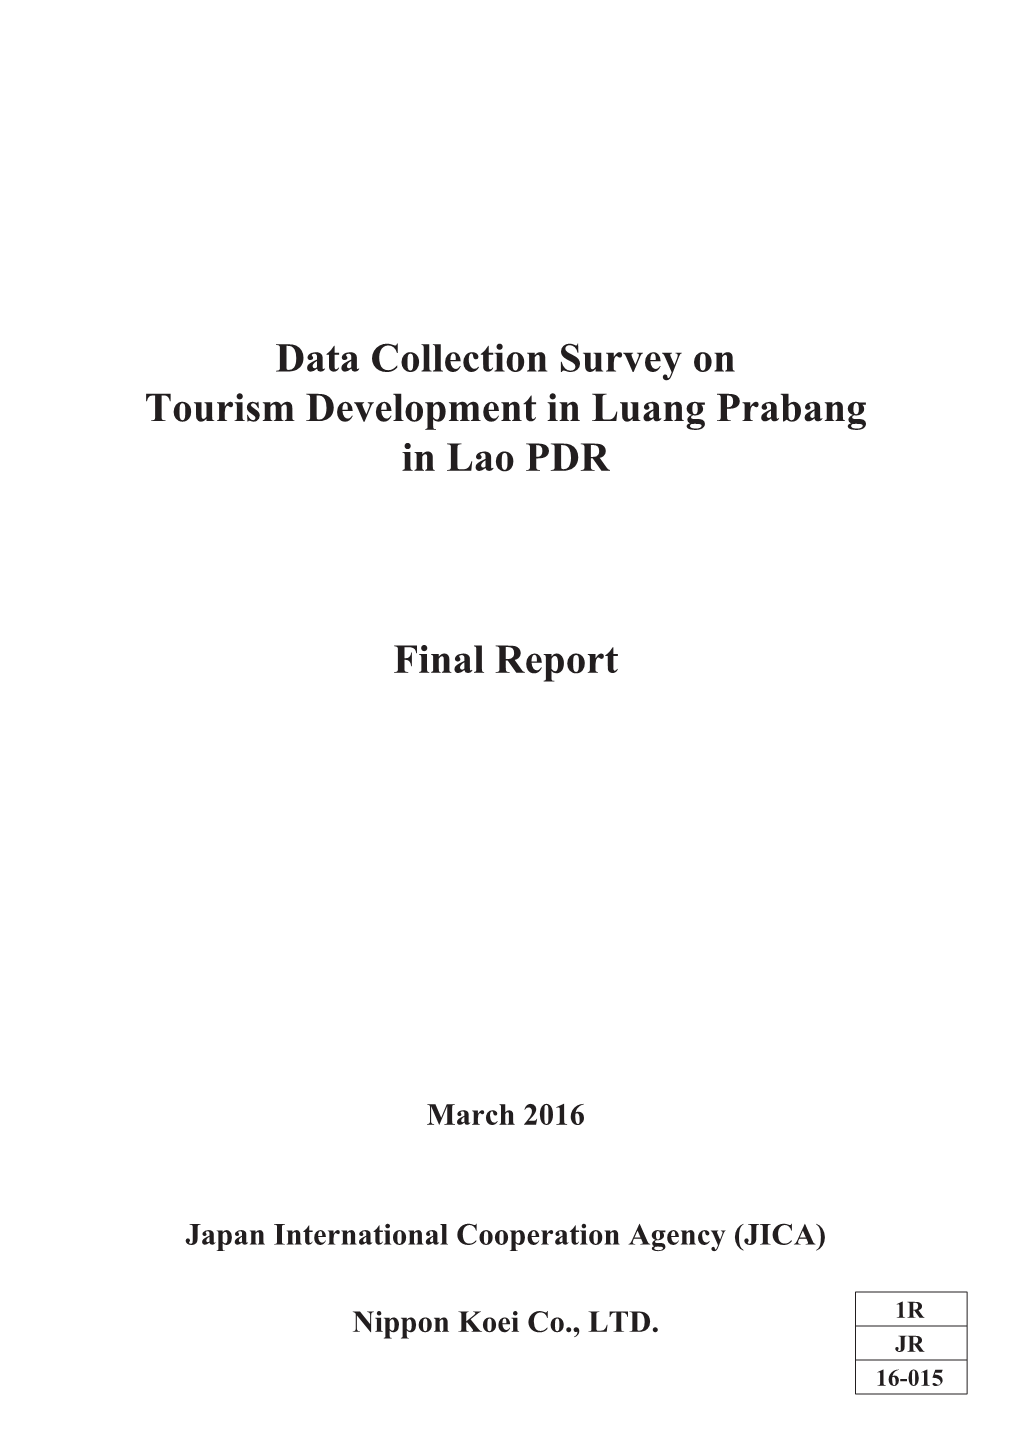 Data Collection Survey on Tourism Development in Luang Prabang in Lao PDR